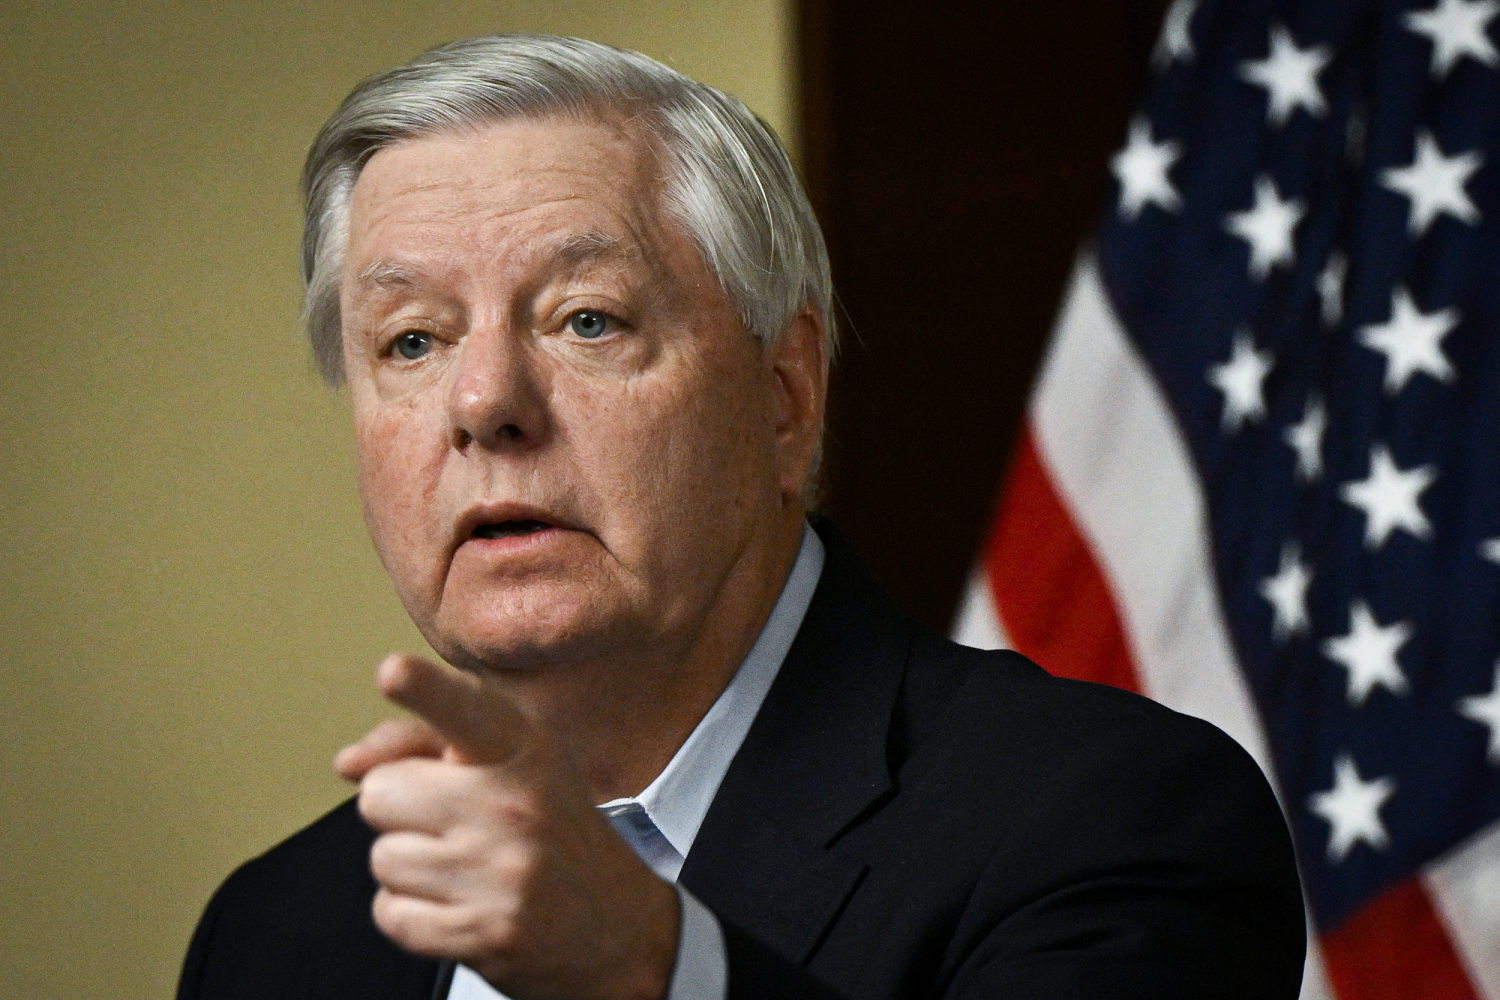 Sen. Lindsey Graham says Israel should do 'whatever' it has to, comparing the war in Gaza to WWII